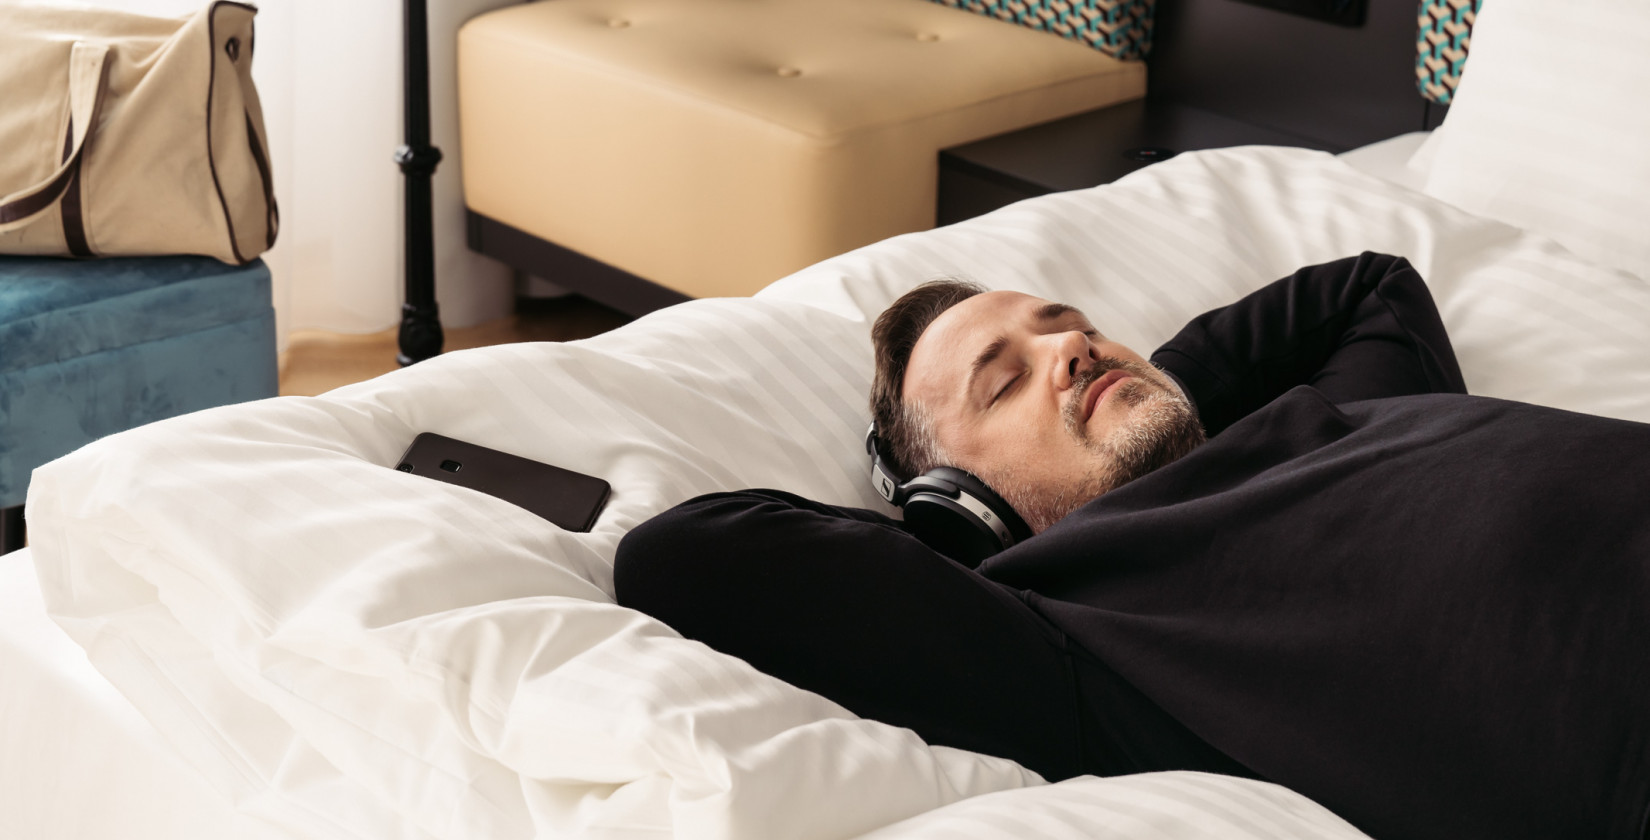 A man lying in bed and listening to music